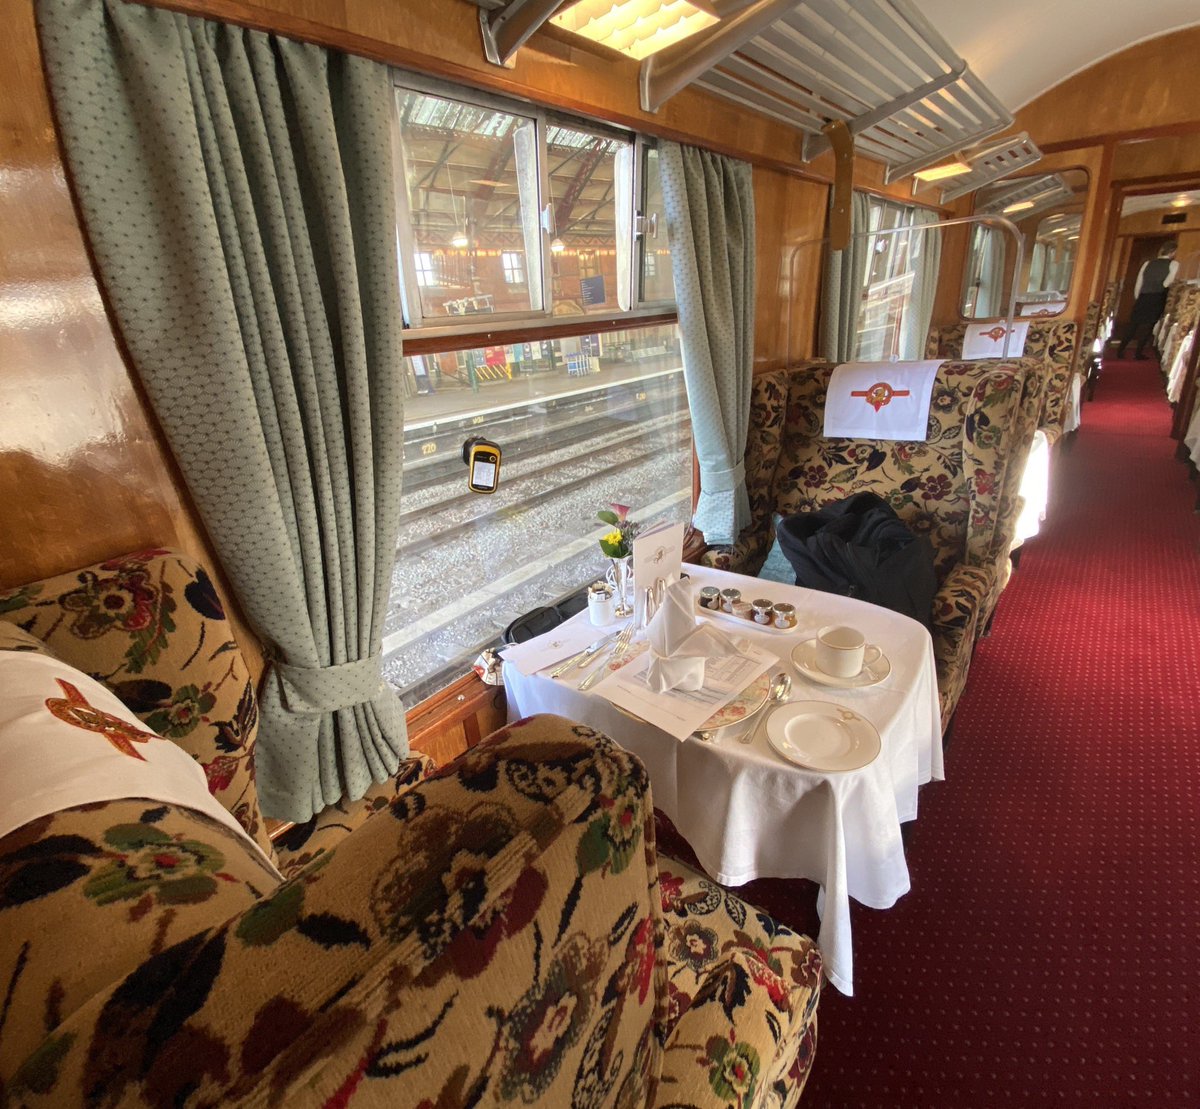 It’s week three of three of the Wednesday Saphos charters from the south west, with Royal Scot and Britannia double-heading over the banks to Plymouth. My GPS is set-up, the toplights are wide open and breakfast is incoming. Perfect!  @BBCDevon  @N60BRA